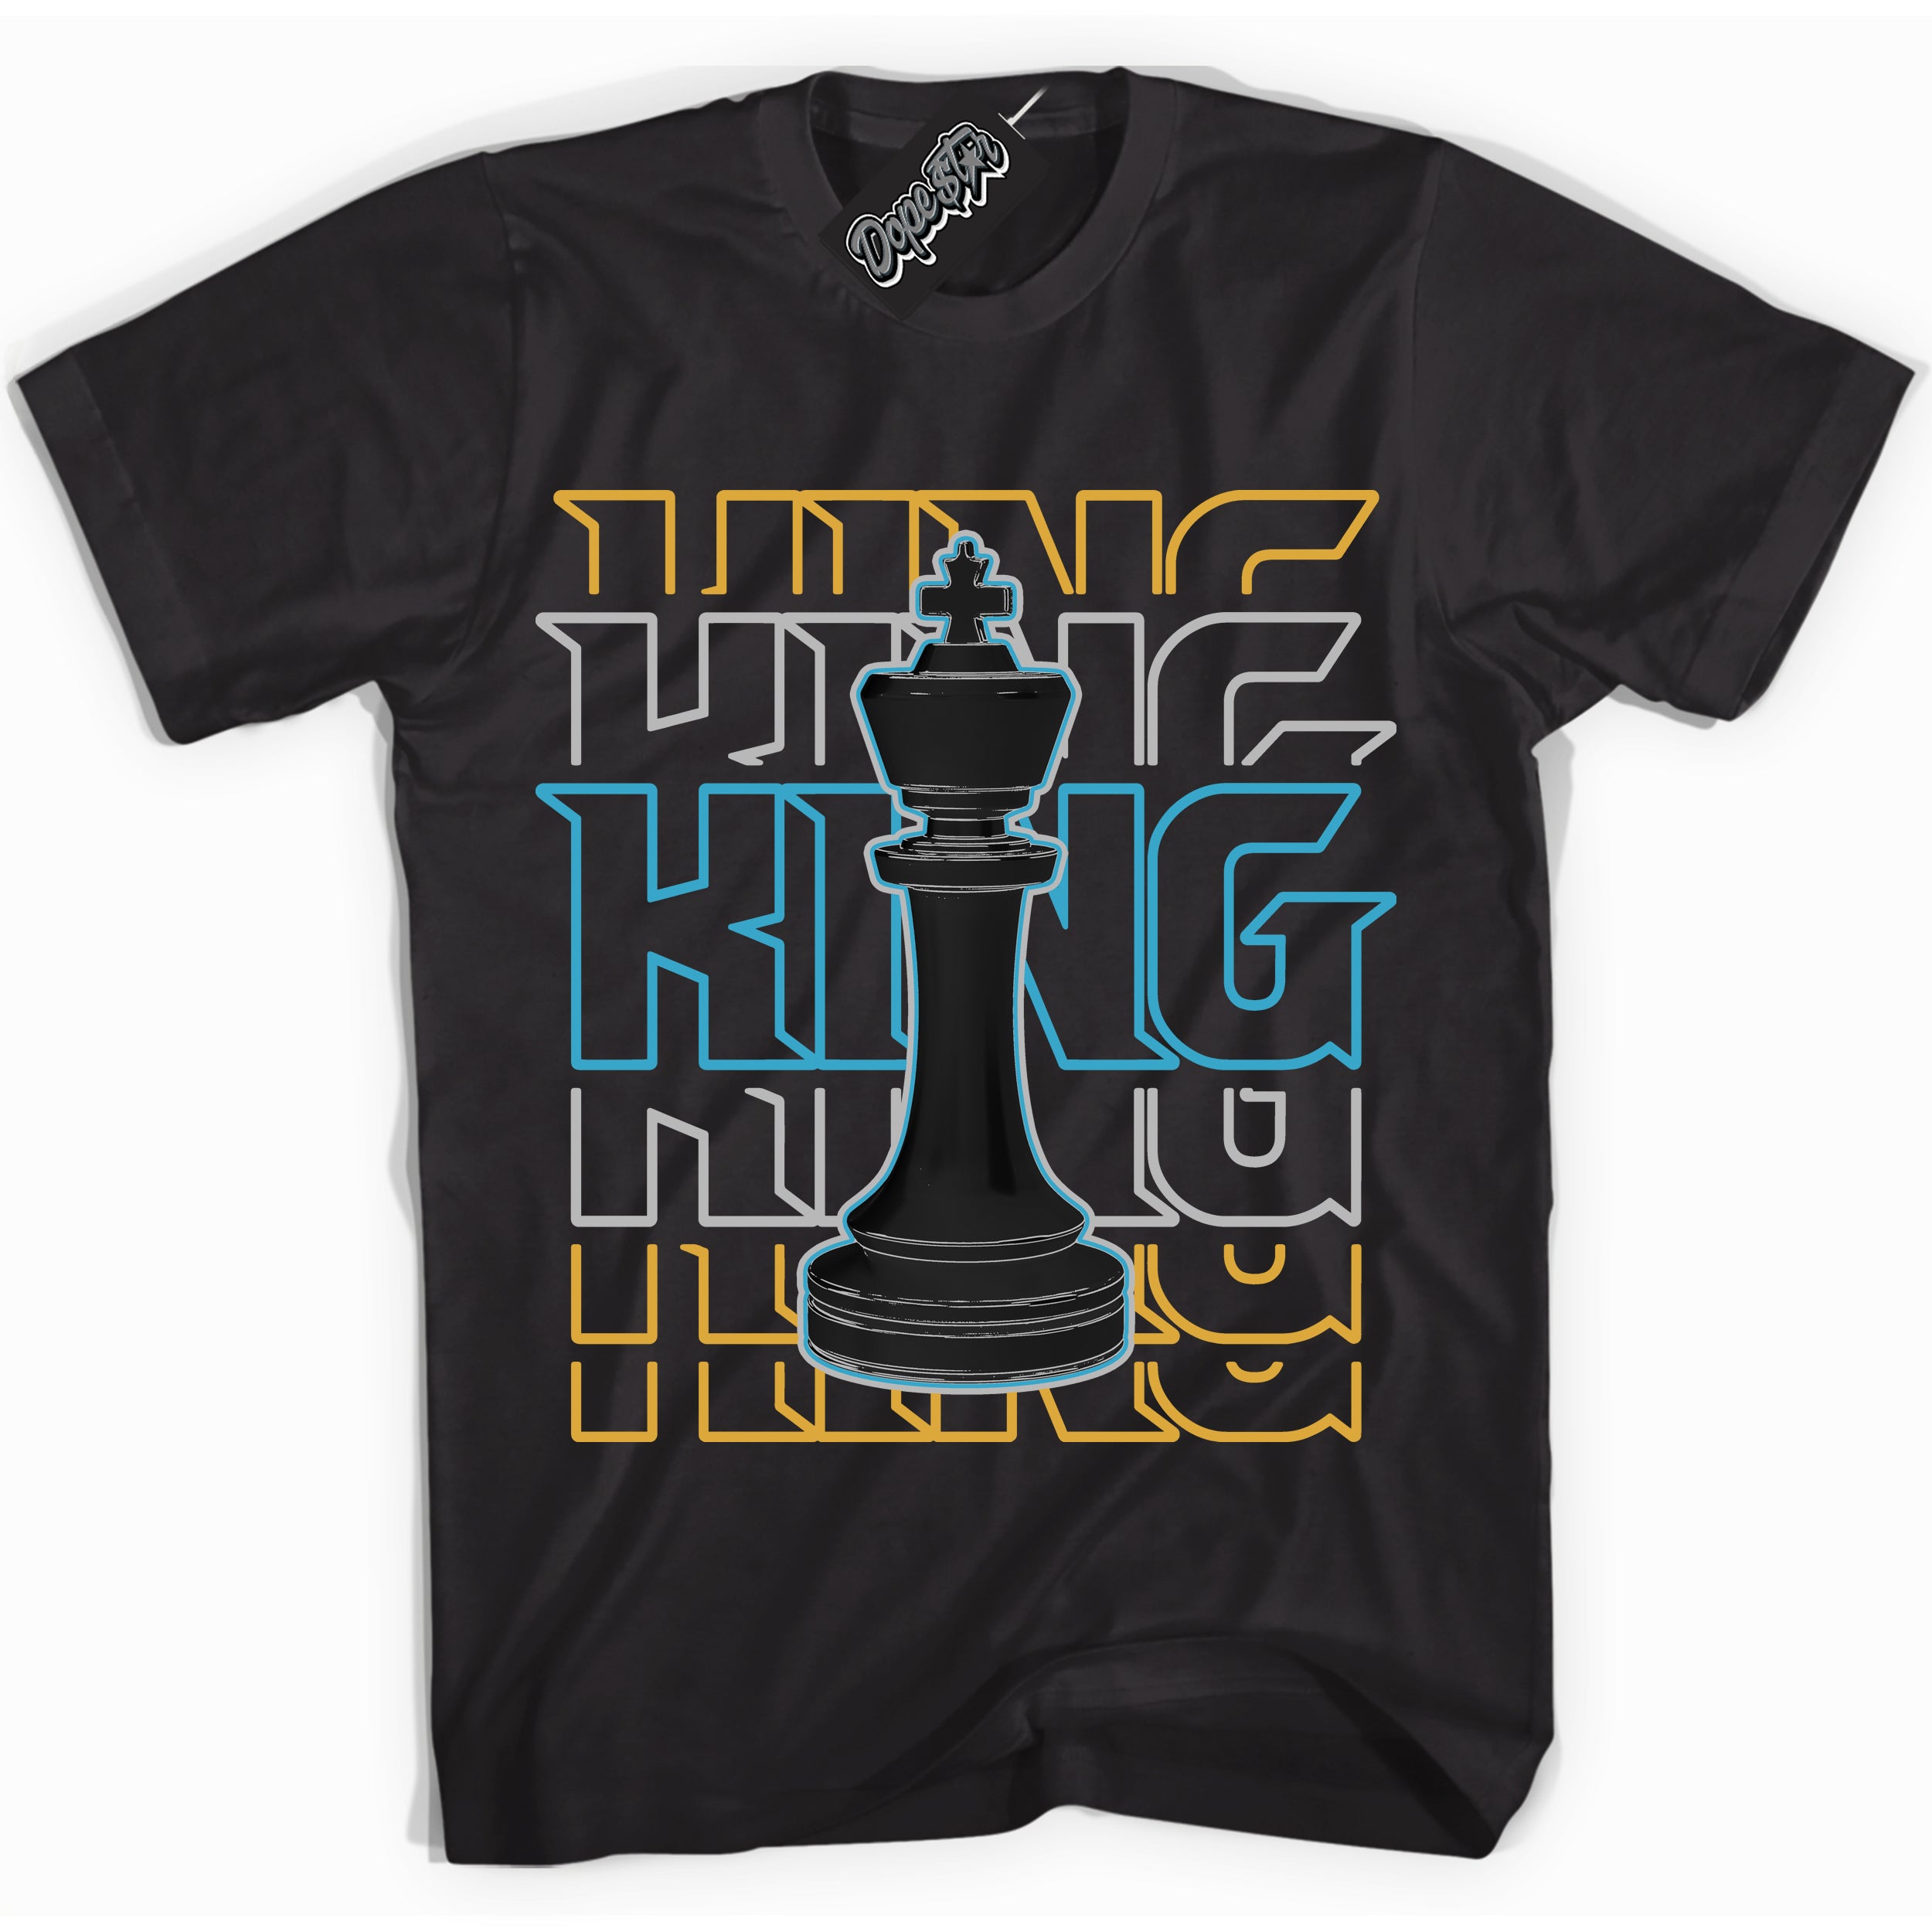 Cool Black Shirt with “ King Chess” design that perfectly matches Aqua 5s Sneakers.